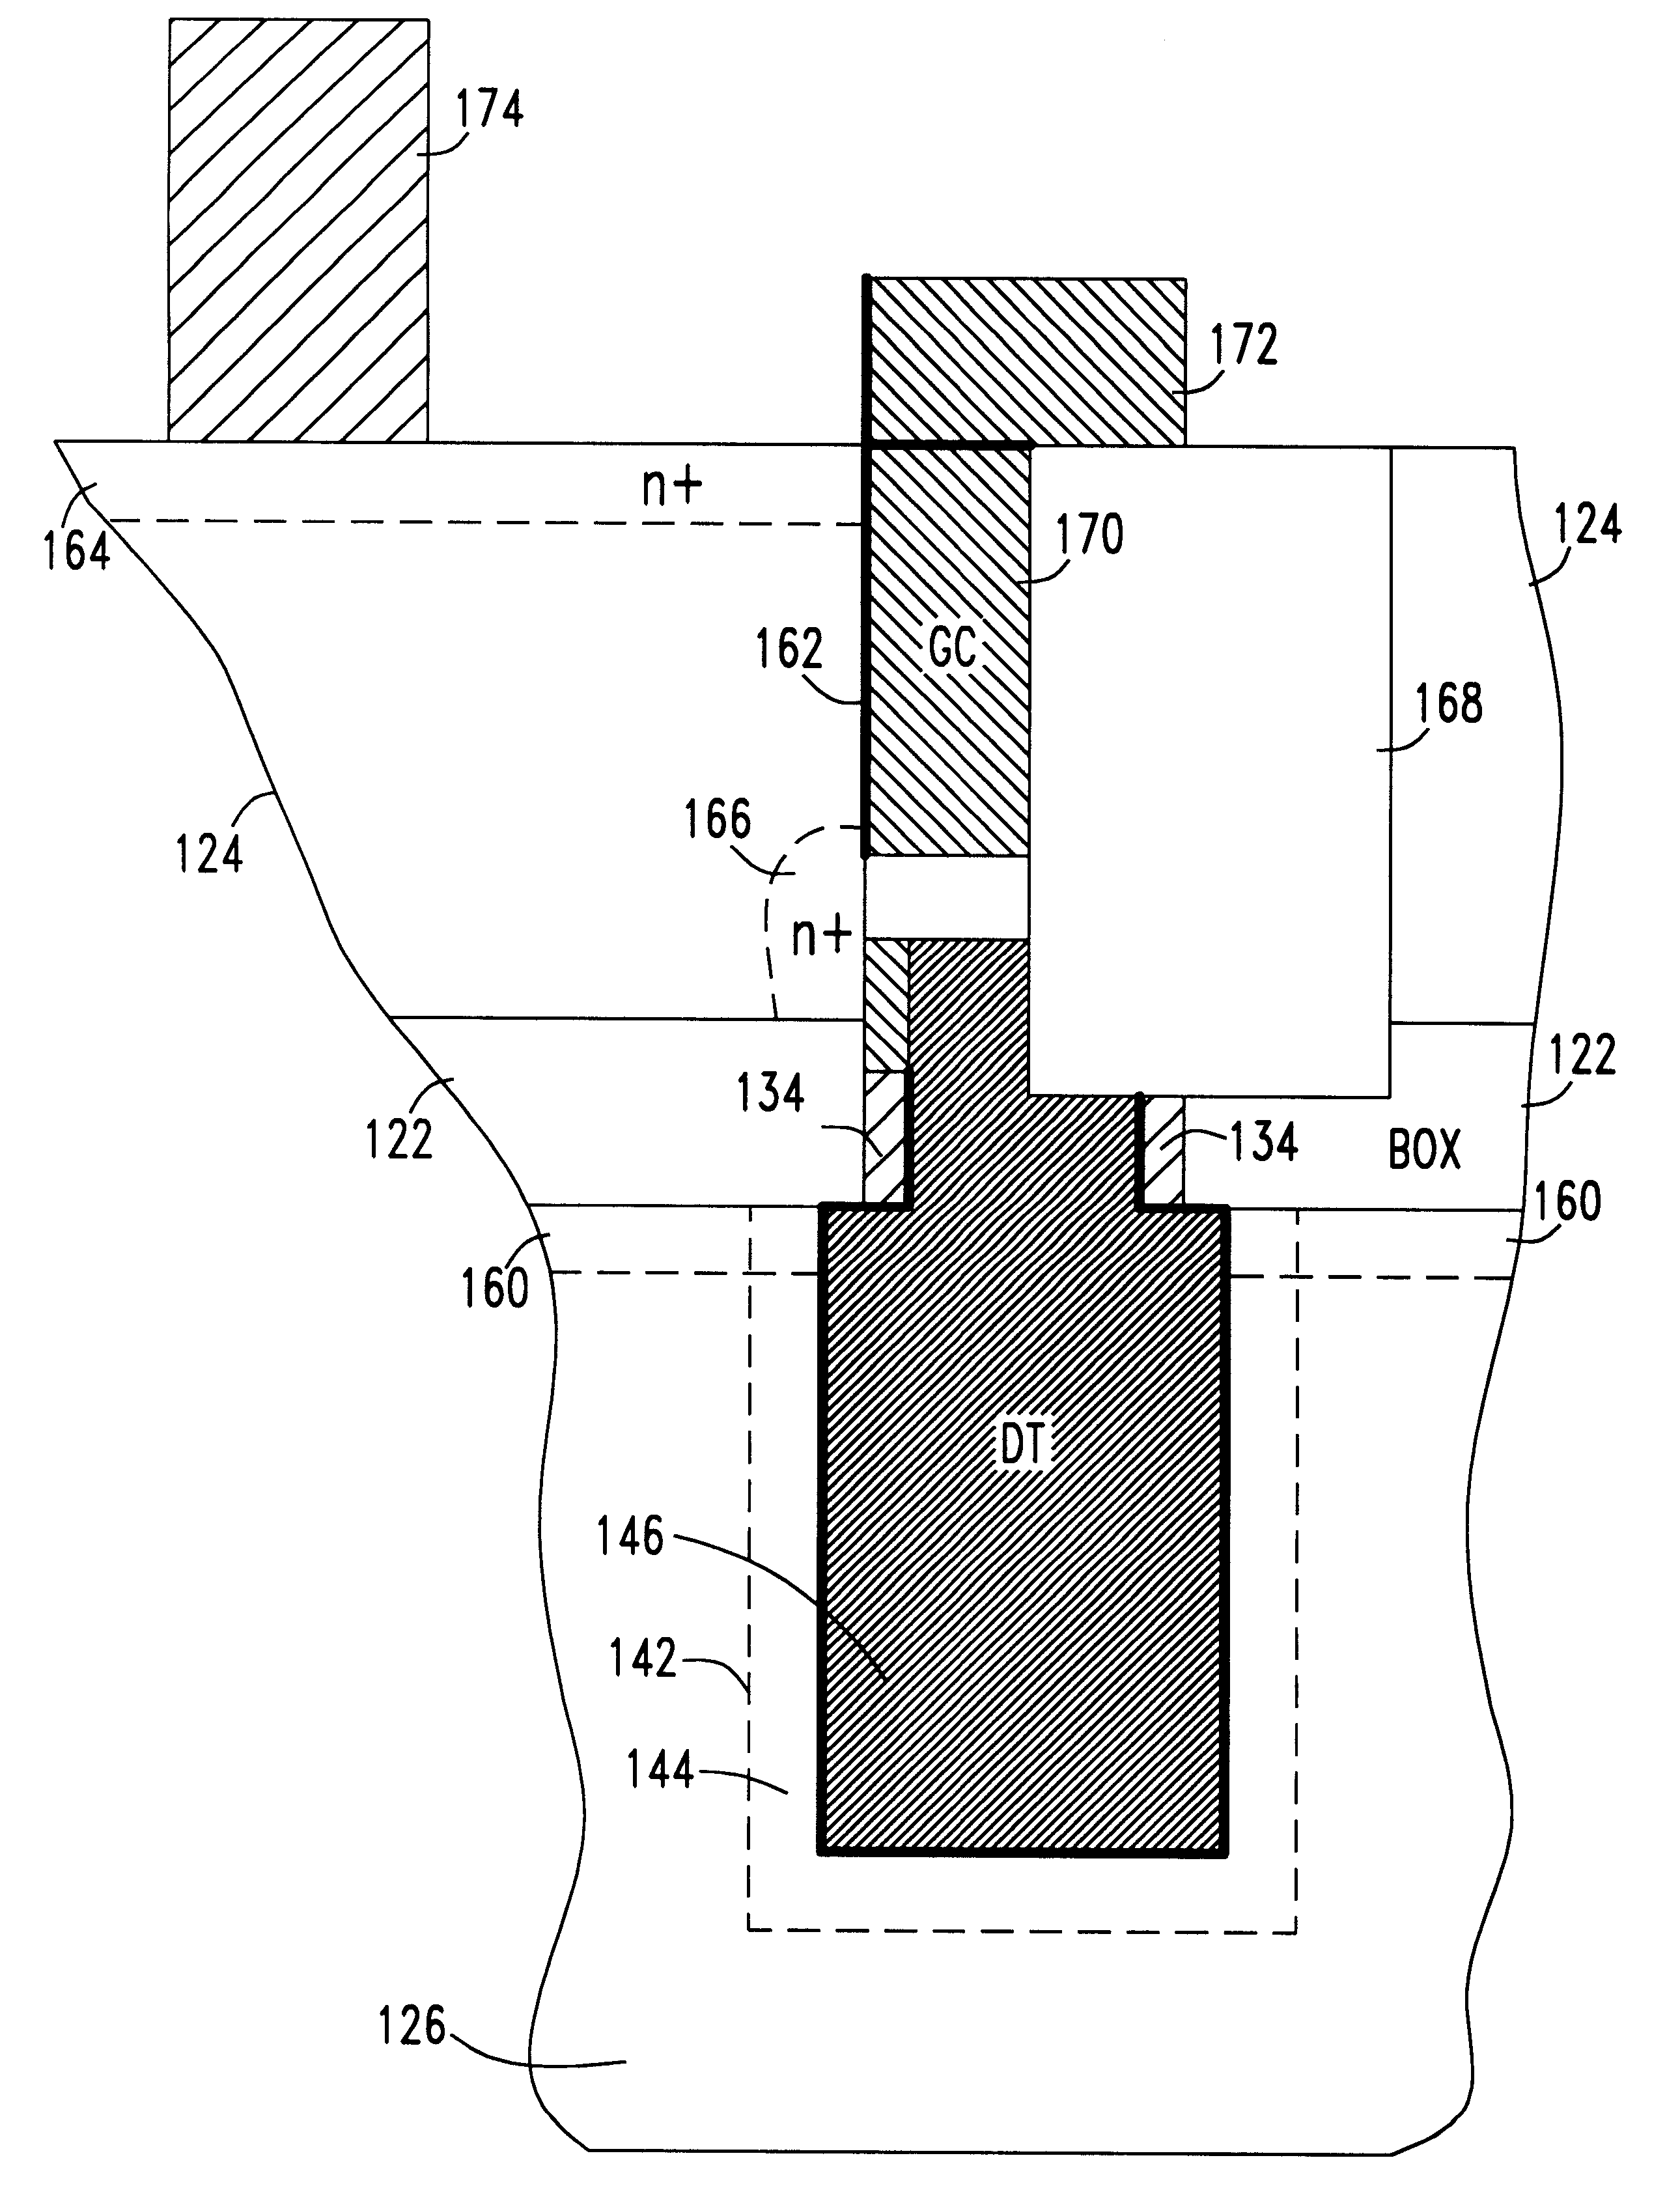 Silicon-on-insulator vertical array device trench capacitor DRAM